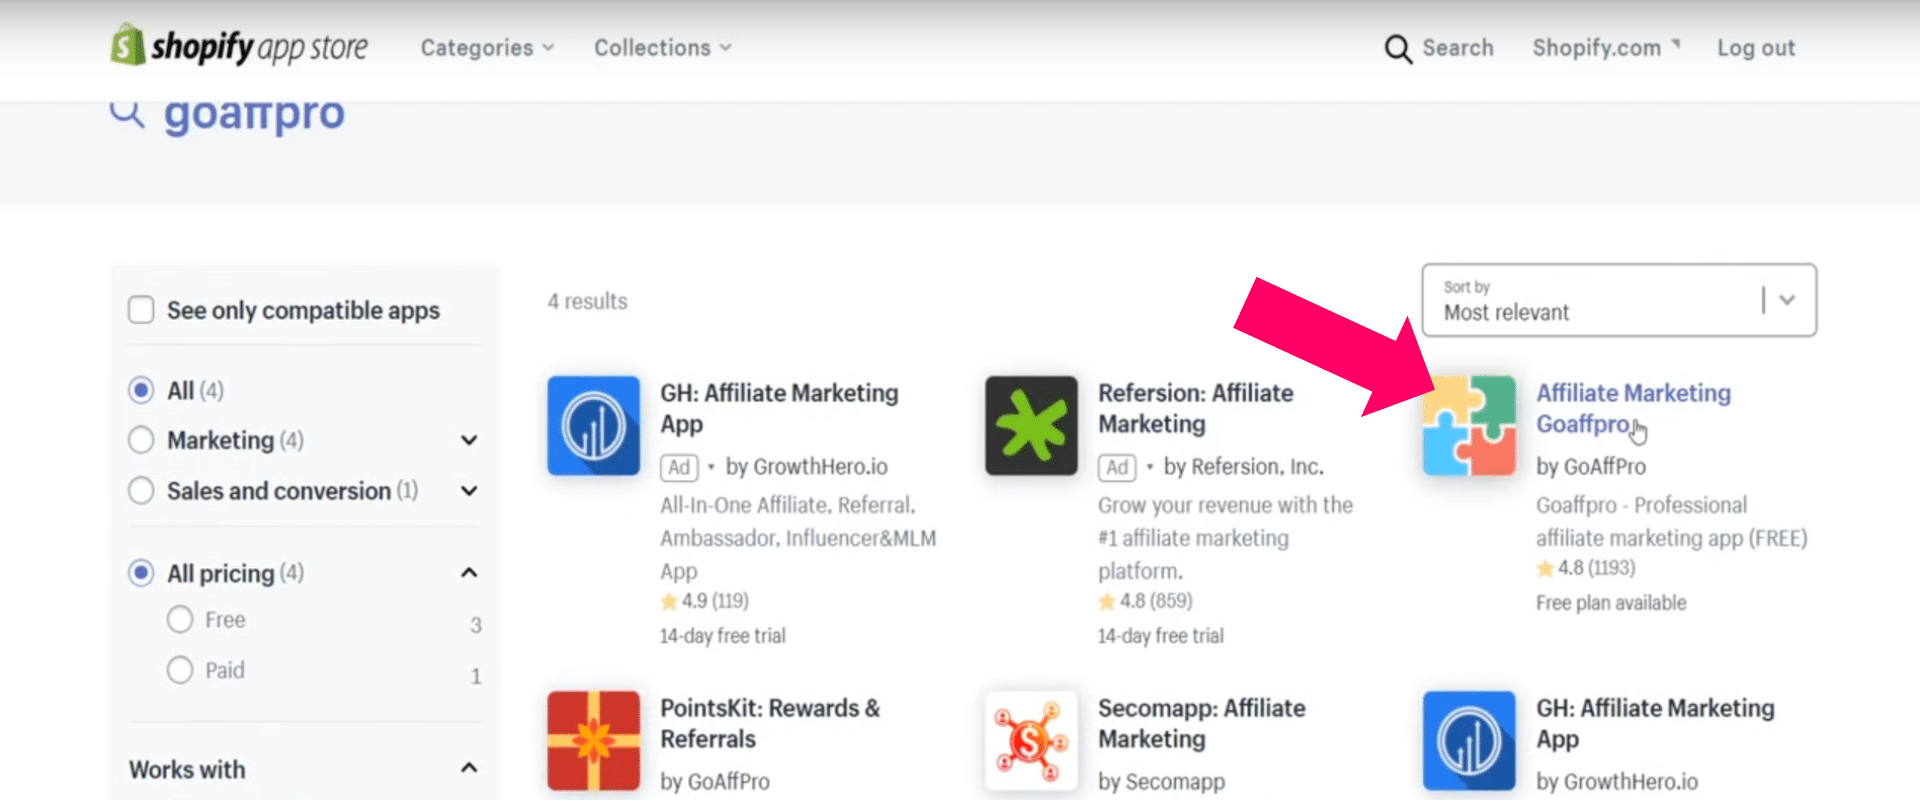 Screenshot of the Shopify App Store search results for "goampro," with a pink arrow pointing to the "Affiliate Marketing GoAffPro" app by GoAffPro. Filters on the left show Marketing (4) selected.